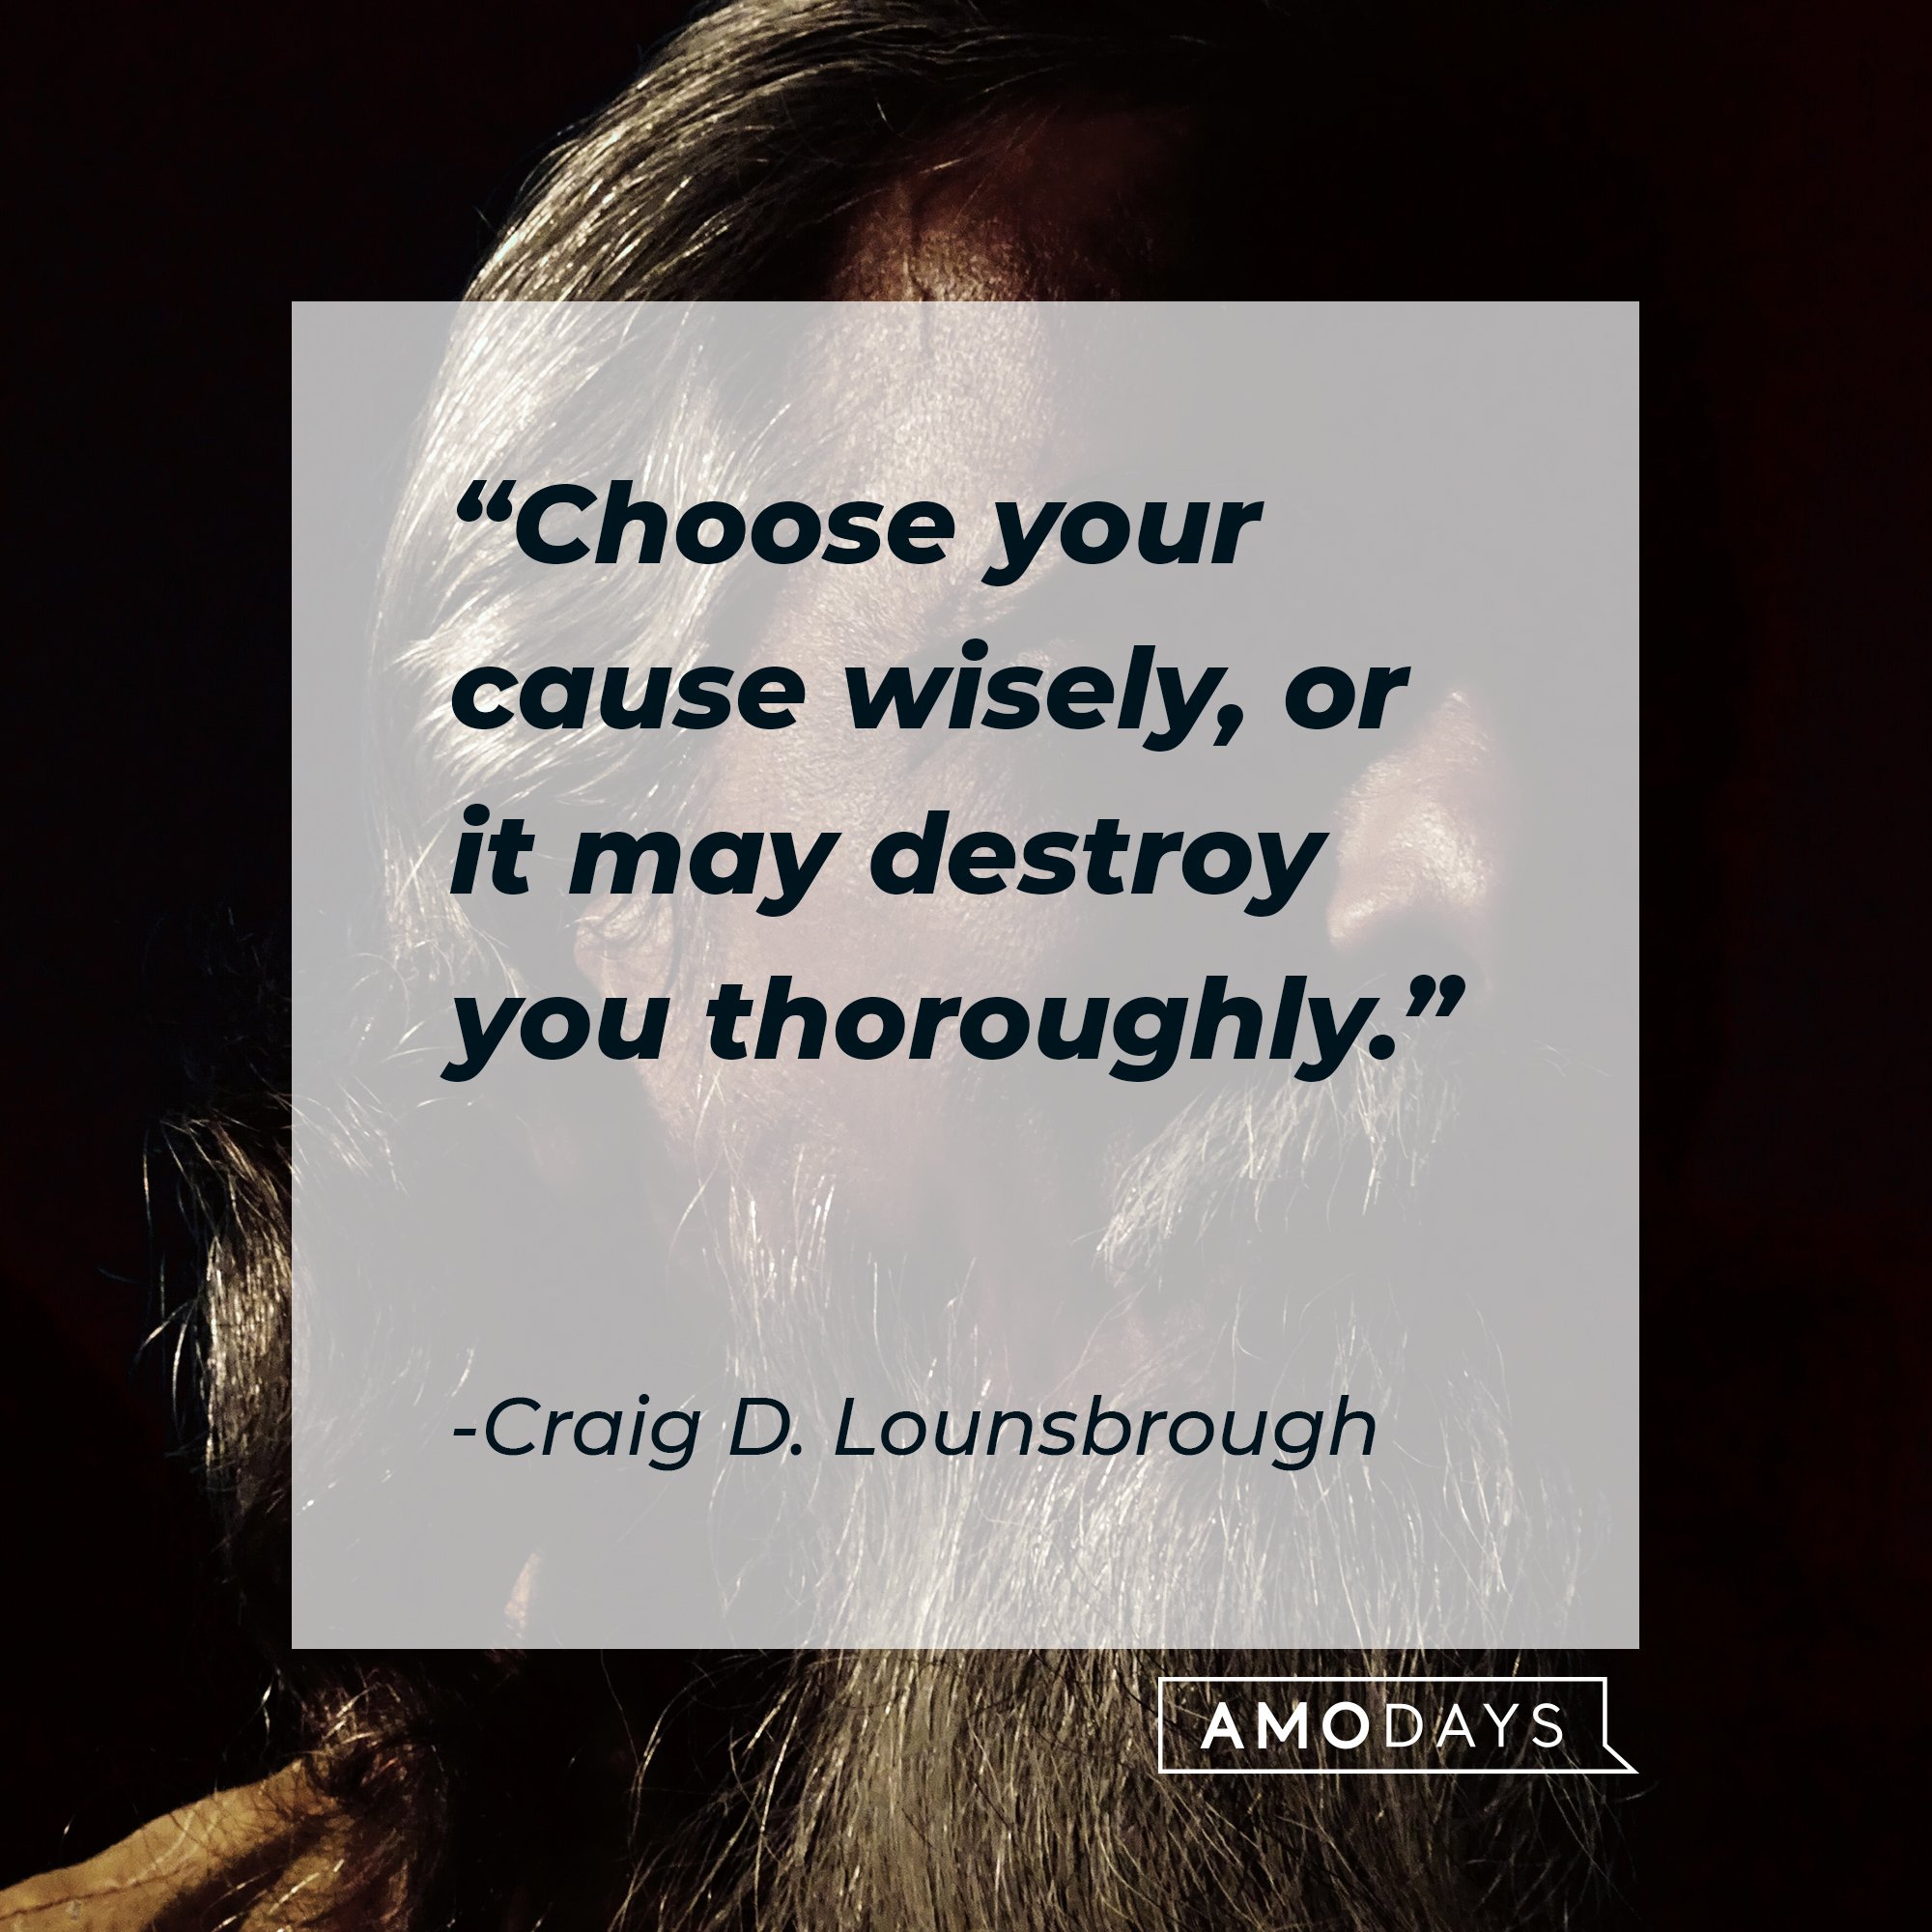 Craig D. Lounsbrough’s quote: "Choose your cause wisely, or it may destroy you thoroughly." | Image: AmoDays